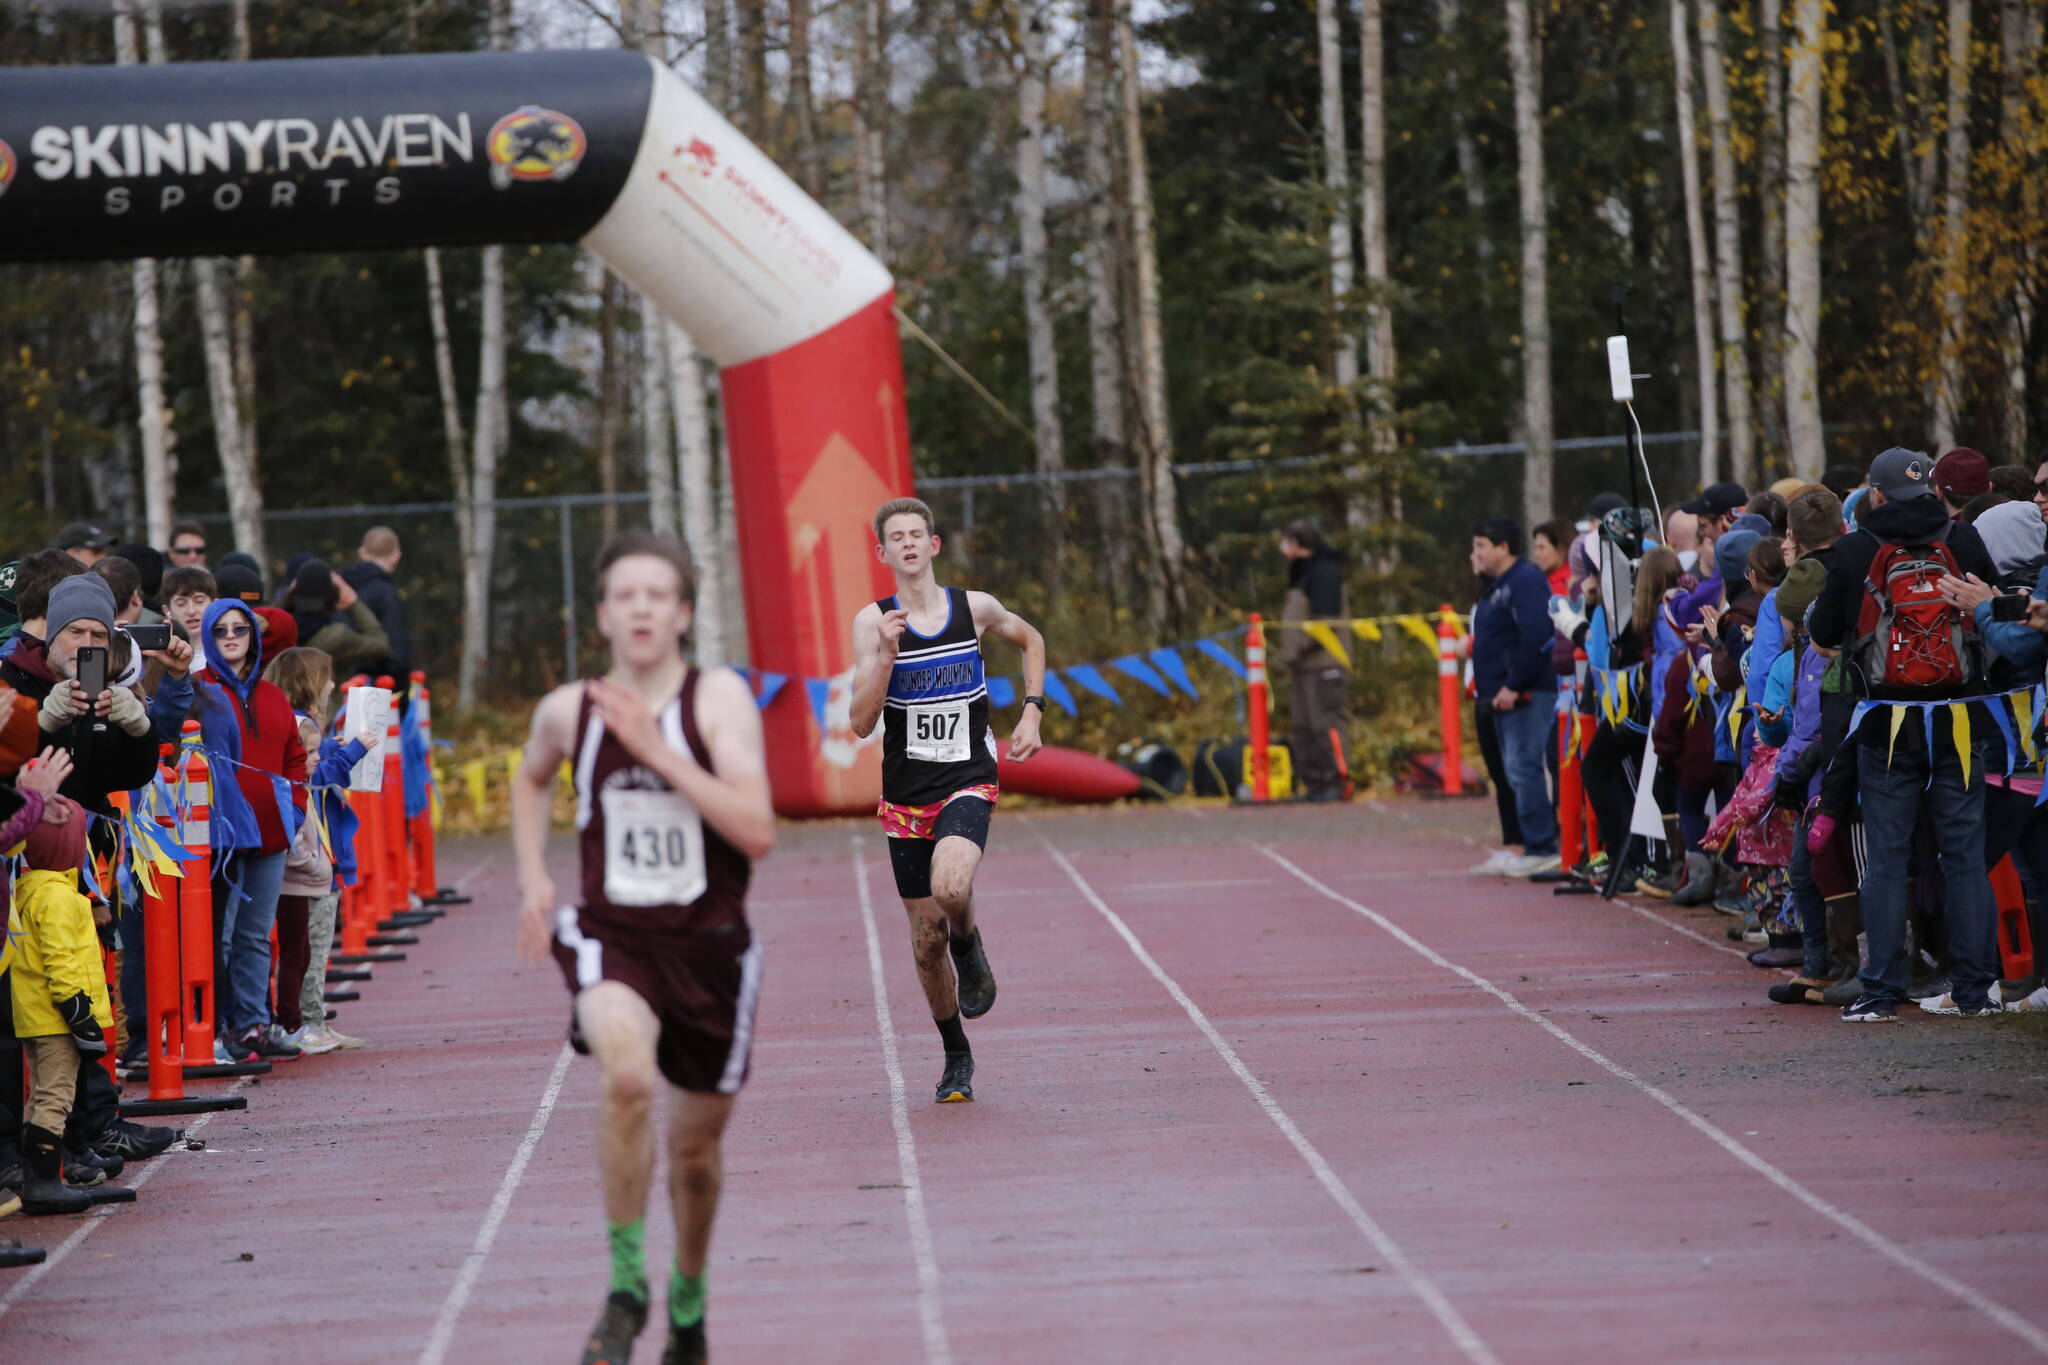 Thunder Mountain High School’s Darin Tingey sprints for the finish during the Alaska School Activities Association’s 2021 state cross country championships, hosted in Anchorage, on Oct. 9, 2021. (Courtesy photo / Eric Hanson)